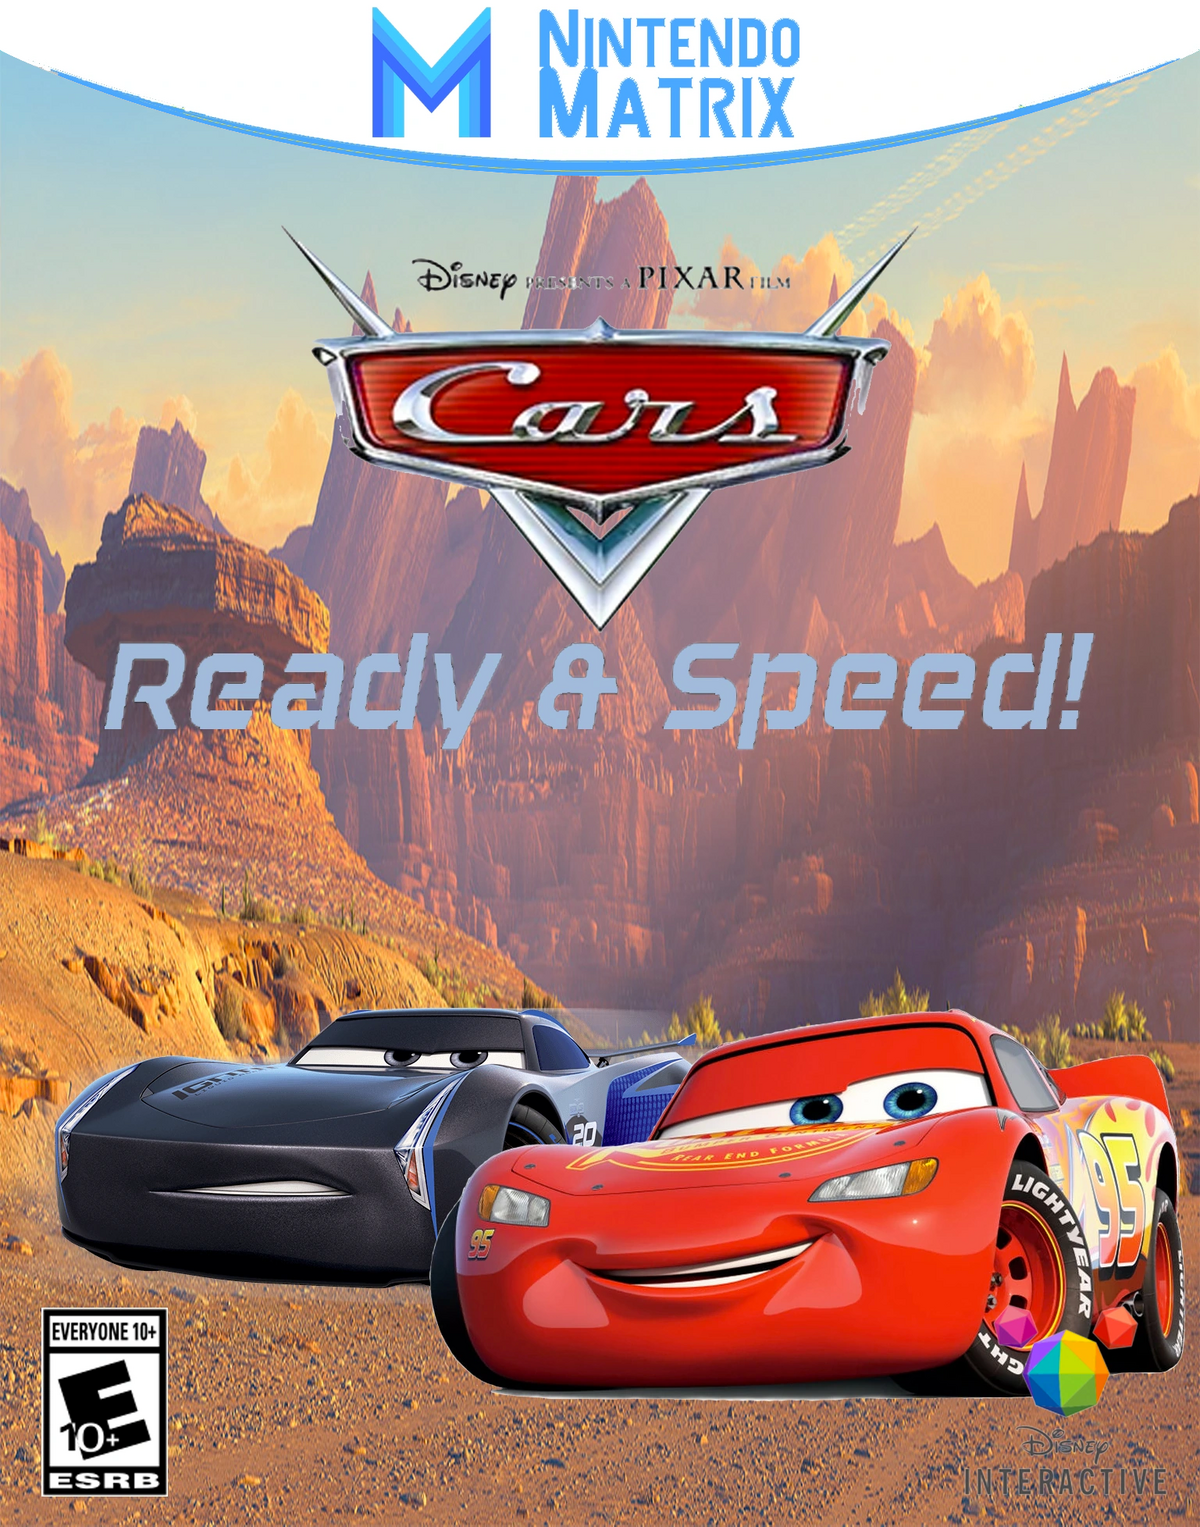 Disney-Pixar's Cars: Ready and Speed! | Video Game Fanon Wiki | Fandom